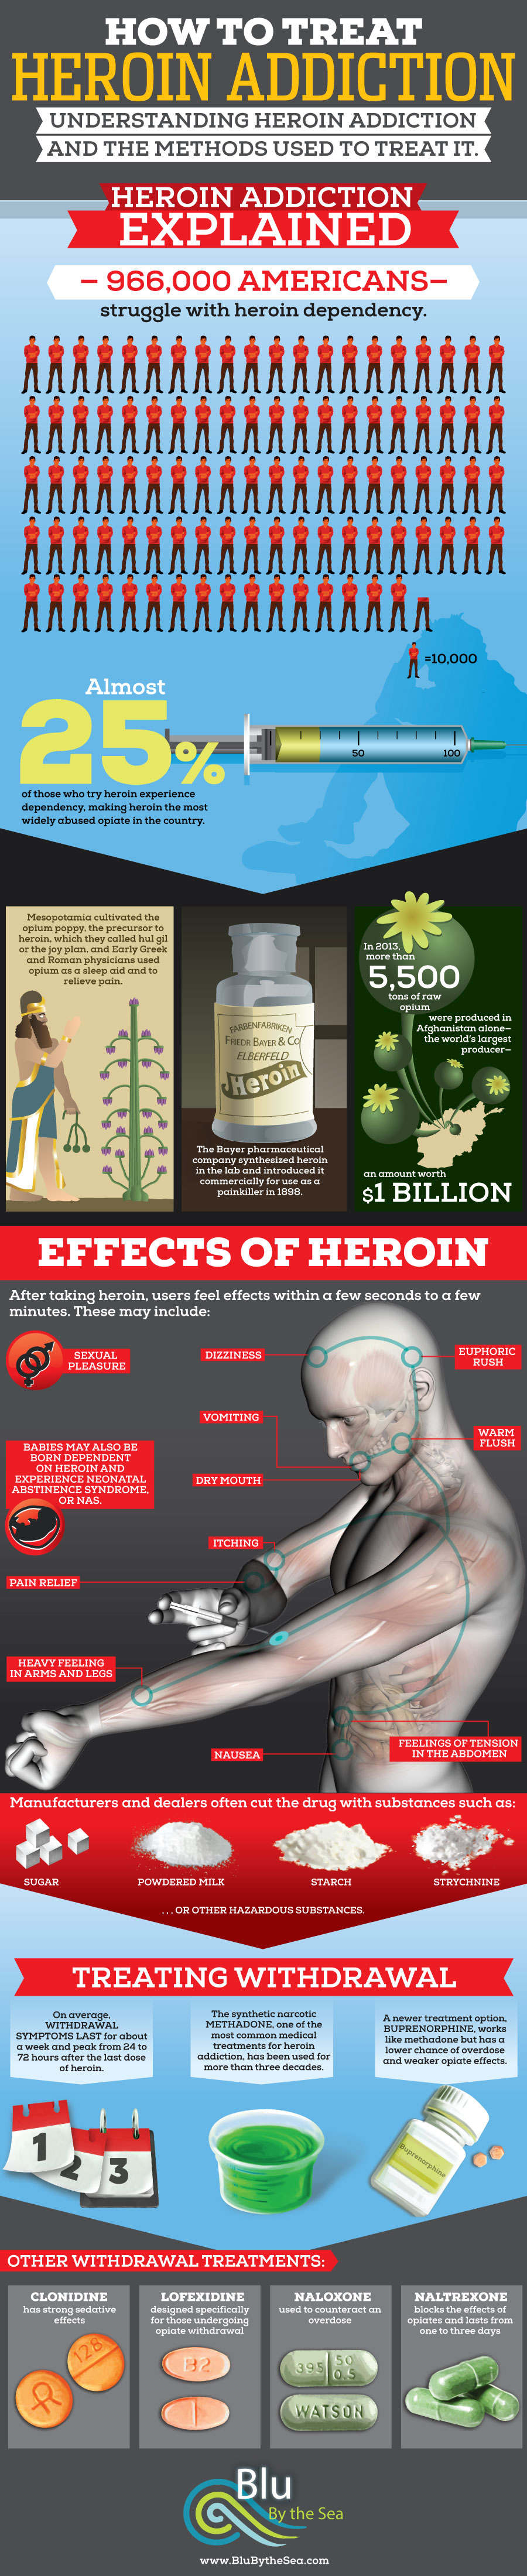 How to Treat Heroin Addiction